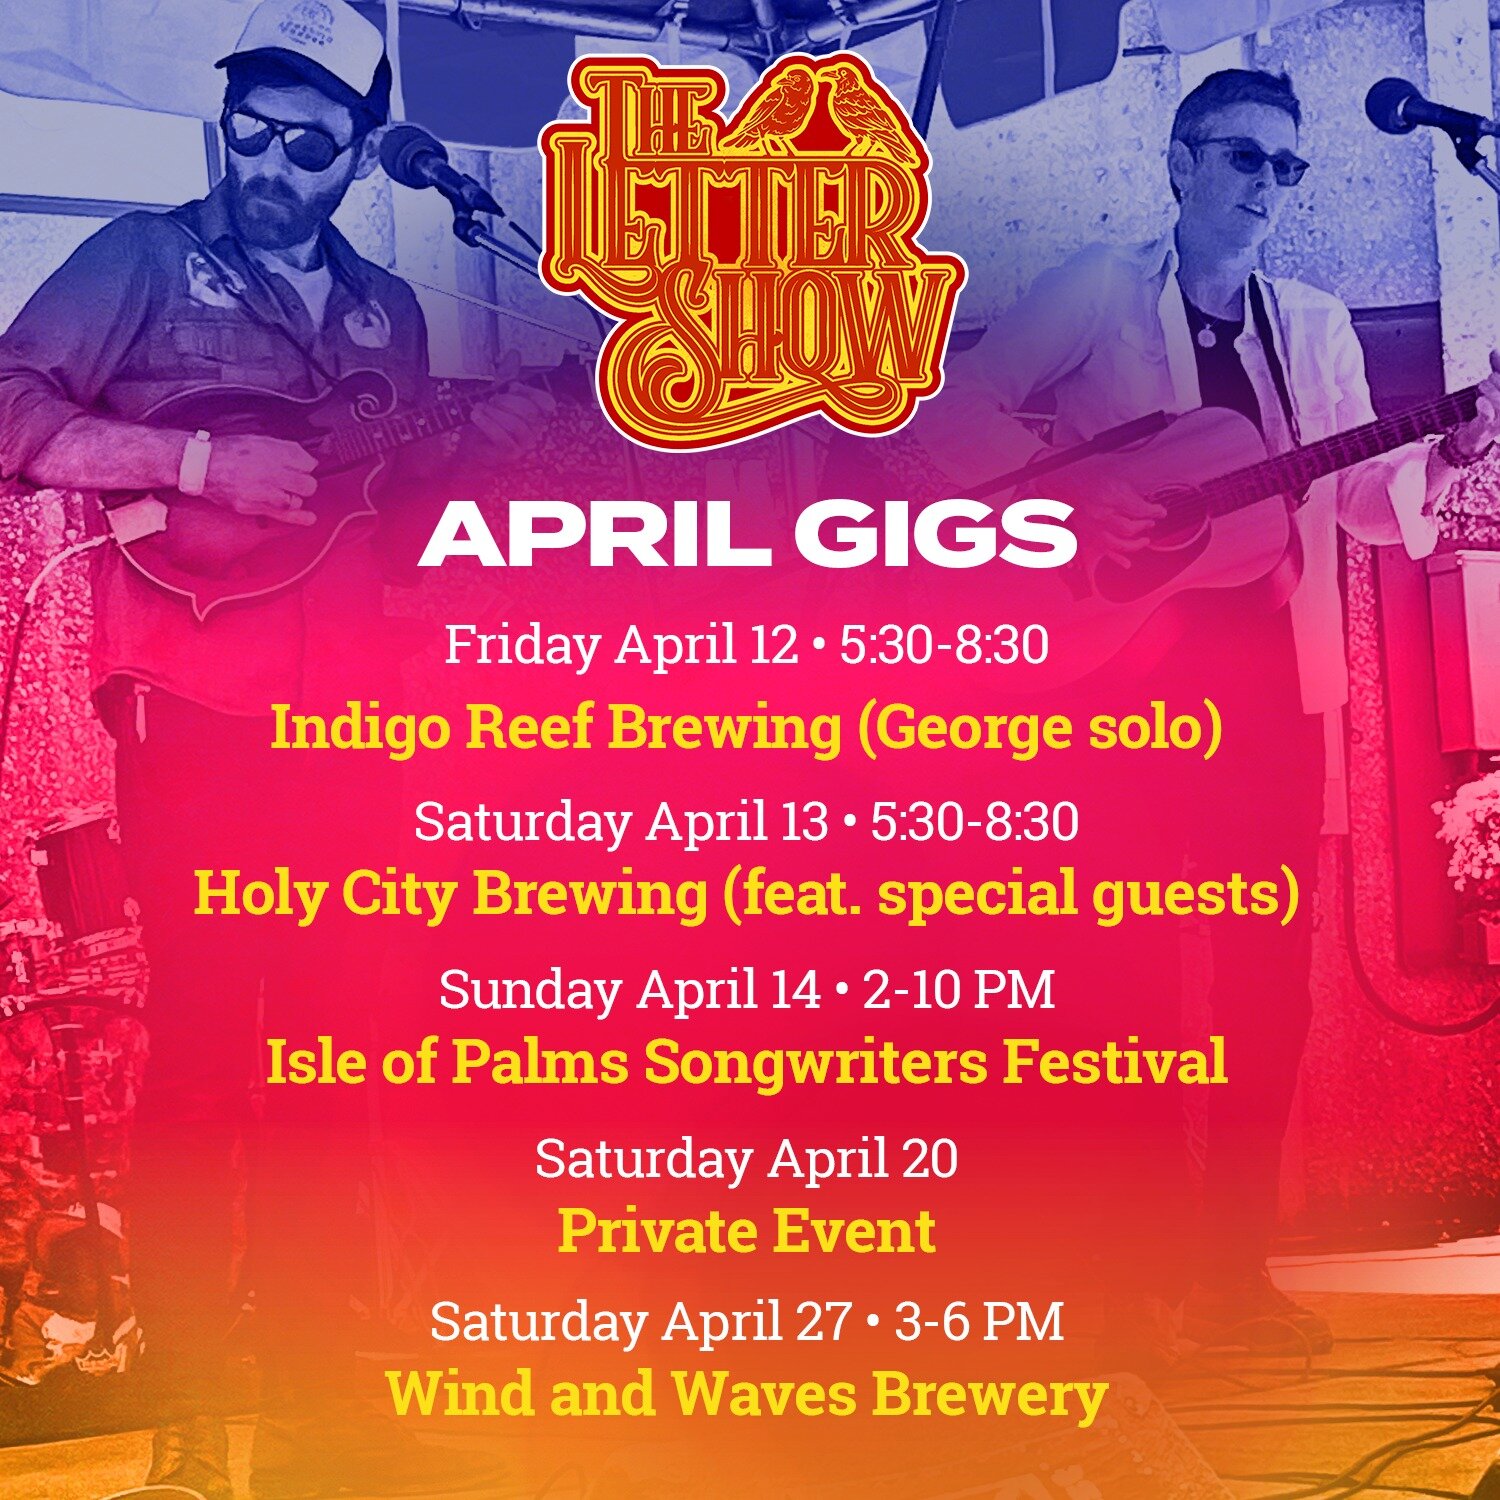 Holy smokes it's already April! We'll be keeping quite busy, hitting both regular spots and a few special events too. Check out our lineup:

➡️ Friday April 12 | Indigo Reef Brewing: George will be playing a rare solo set! Come on out to the first TL